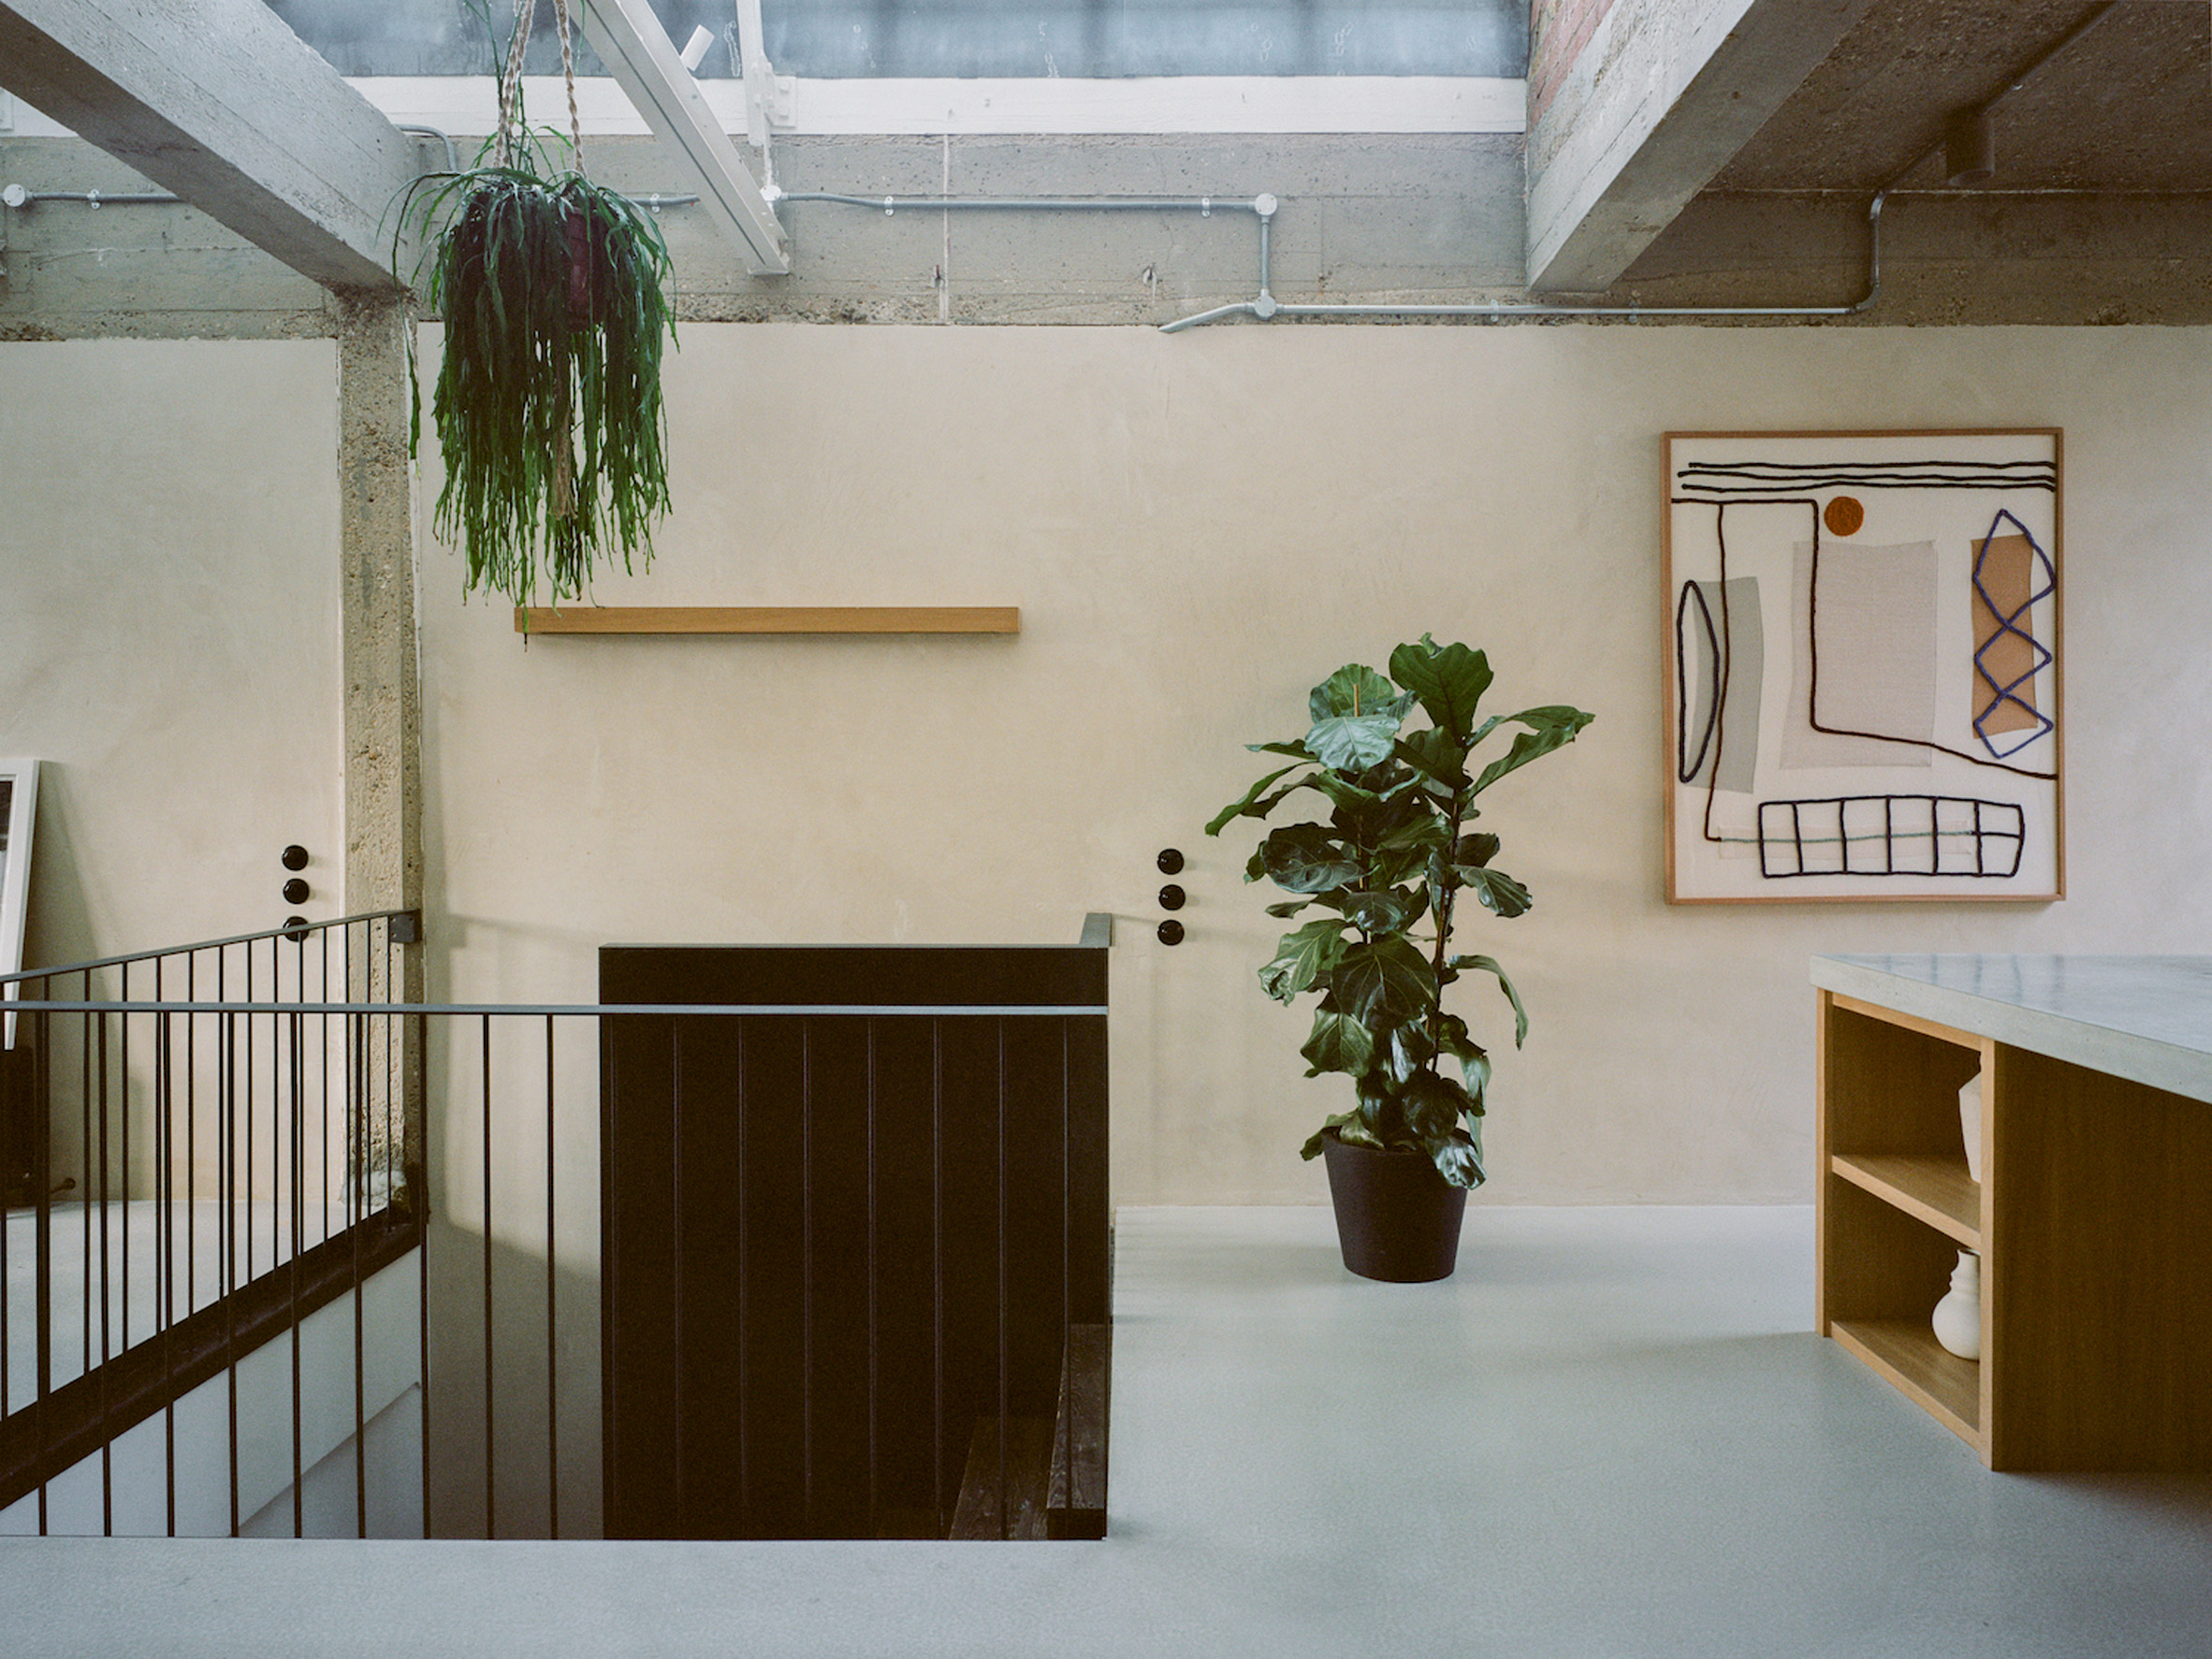 Clay and concrete interior with plants and staircase in Earthrise's Hackney office by Studio McW